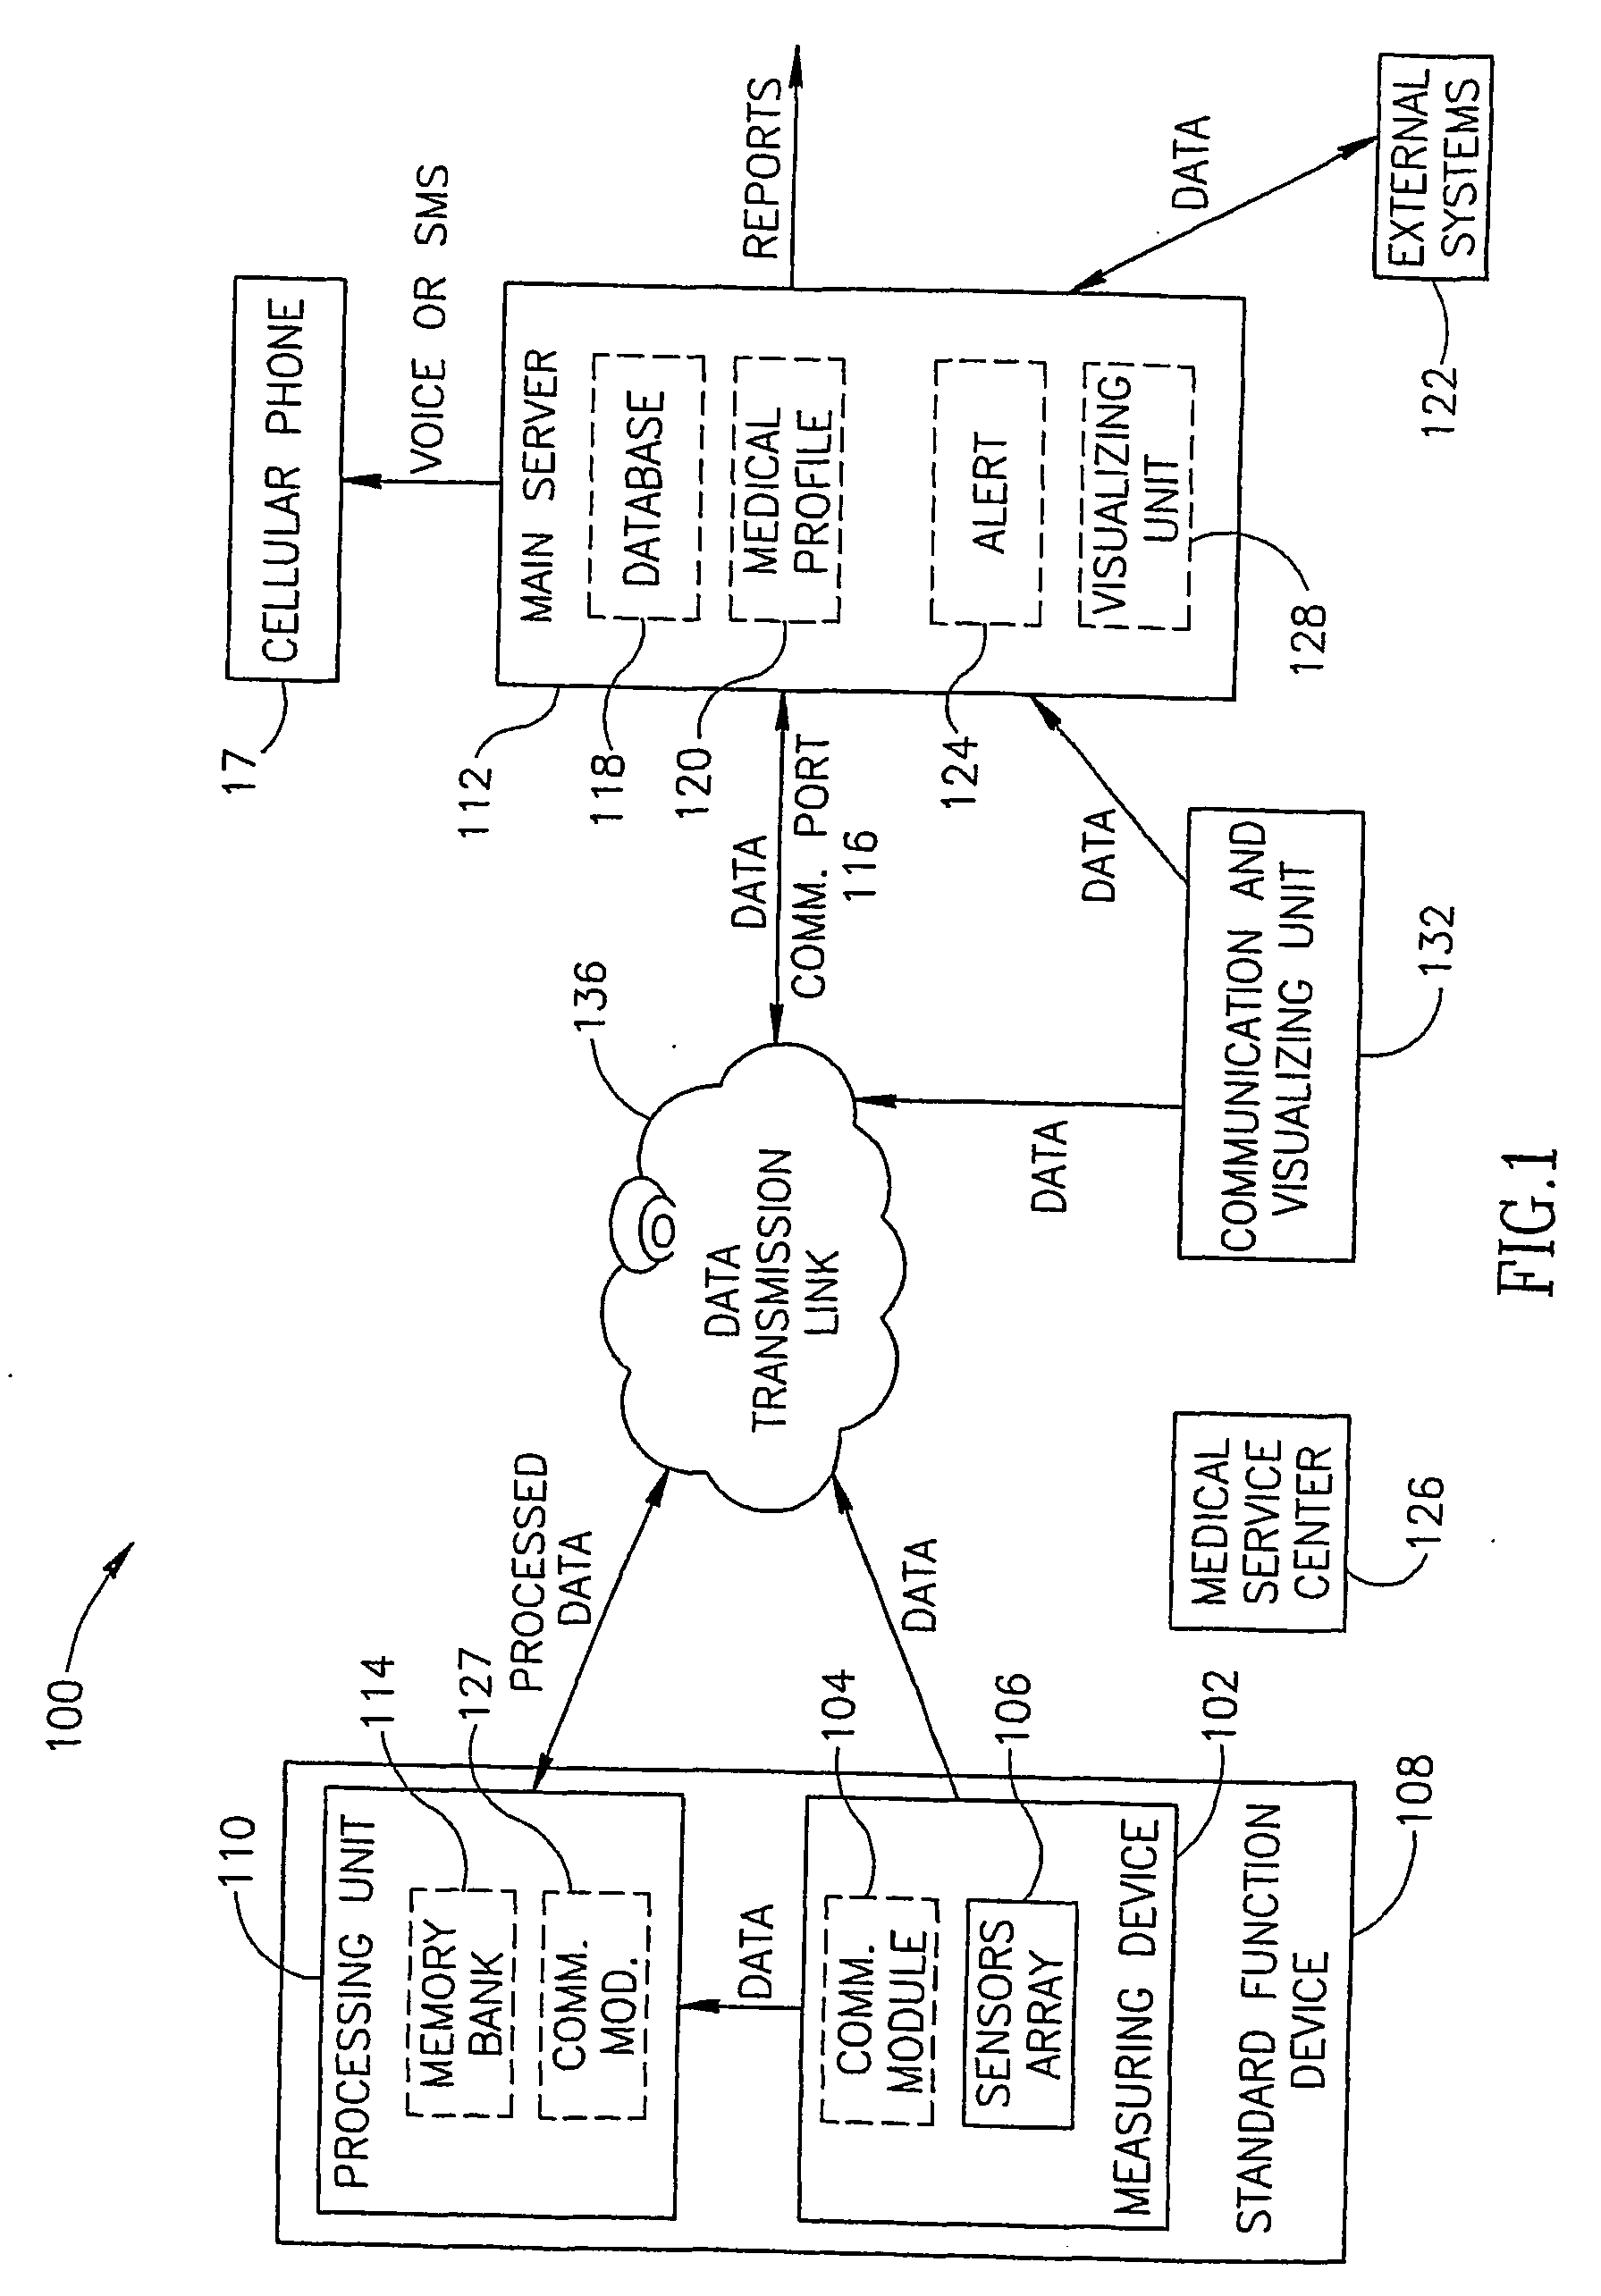 System and method for automatic monitoring of the health of a user